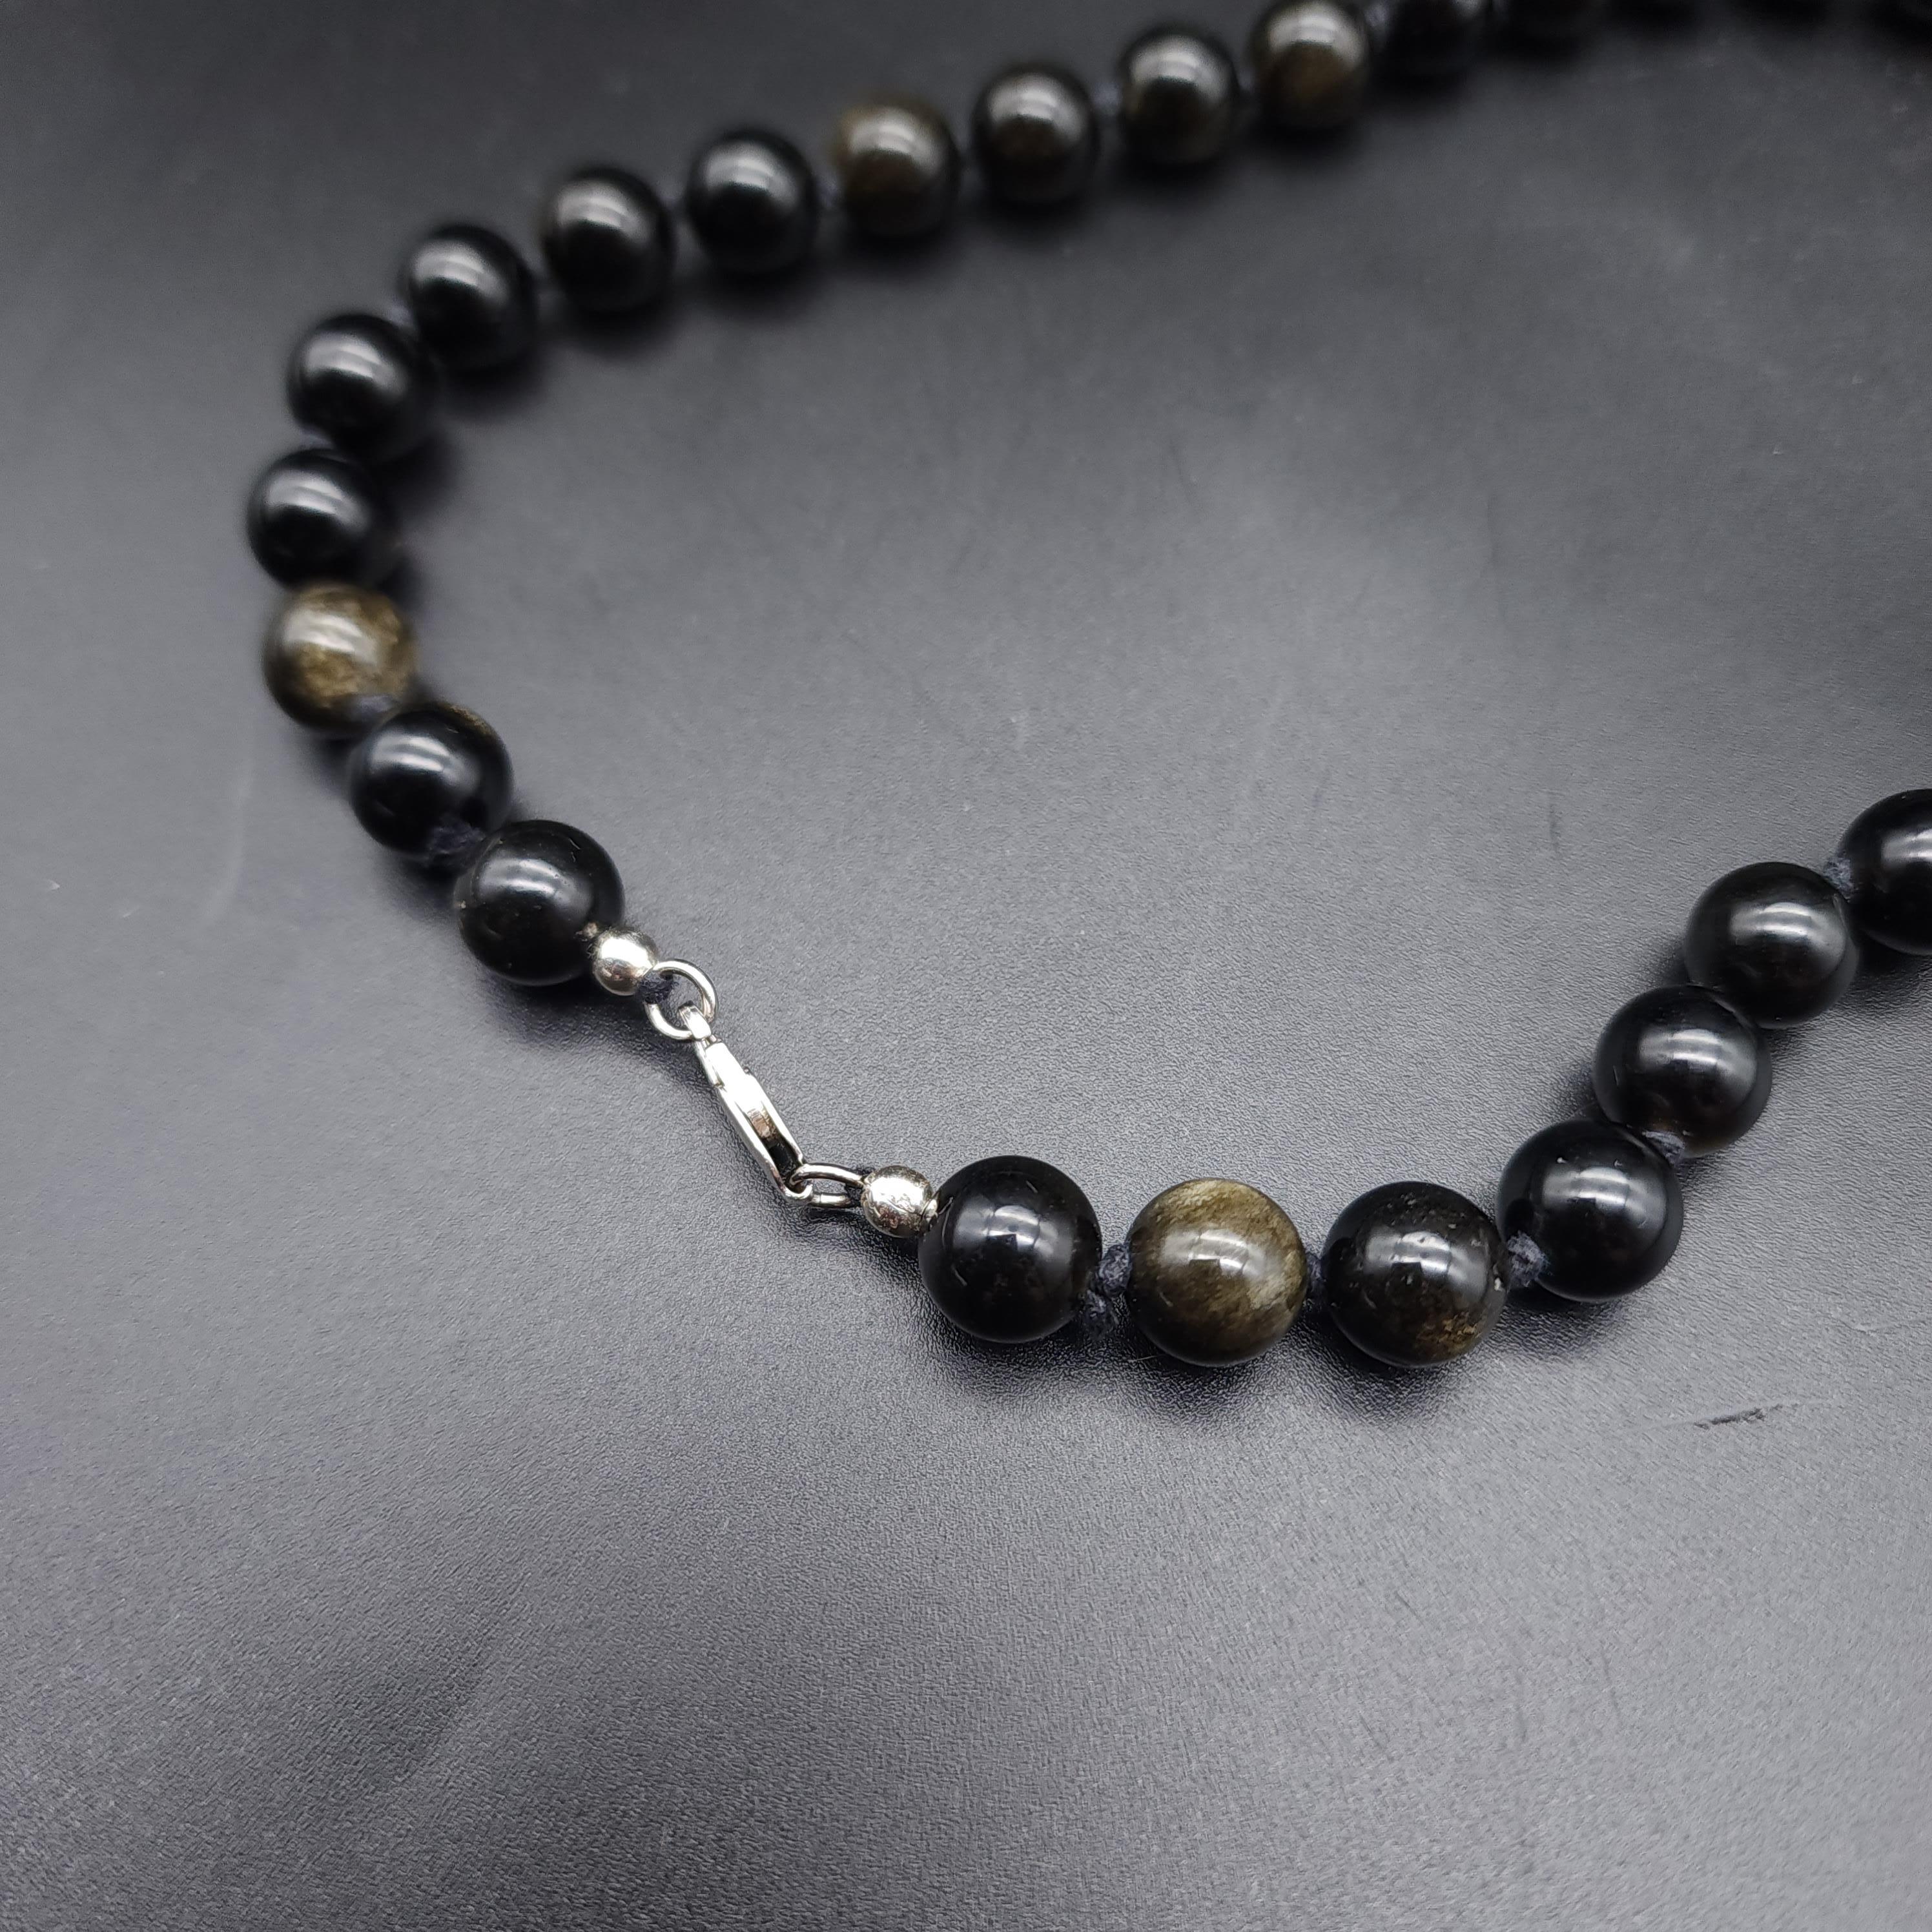 Women's or Men's Dzi Pendant Centerpiece, Obsidian Beads Knotted Necklace  Sterling Silver Clasp For Sale